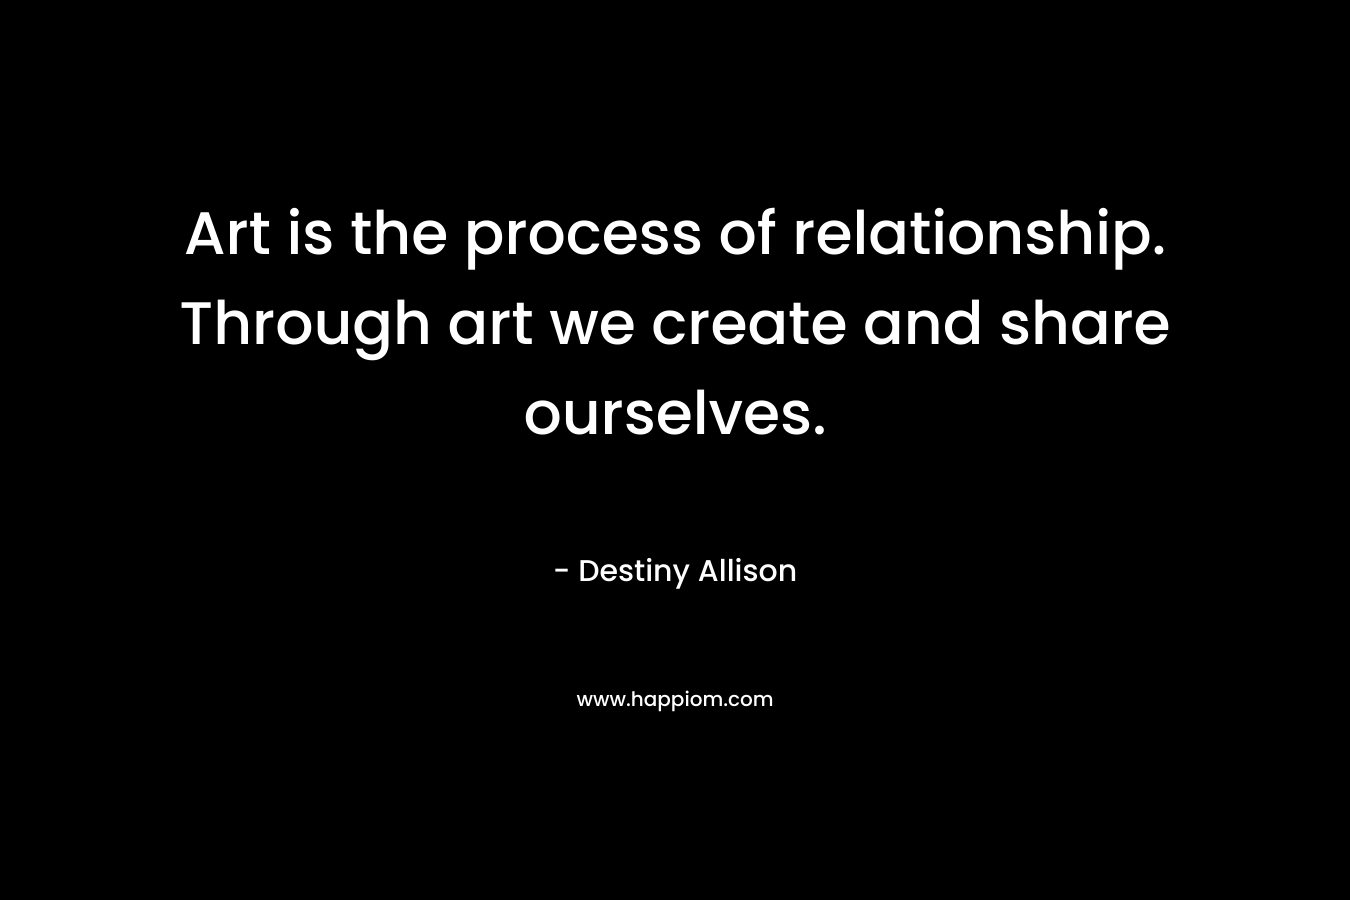 Art is the process of relationship. Through art we create and share ourselves.